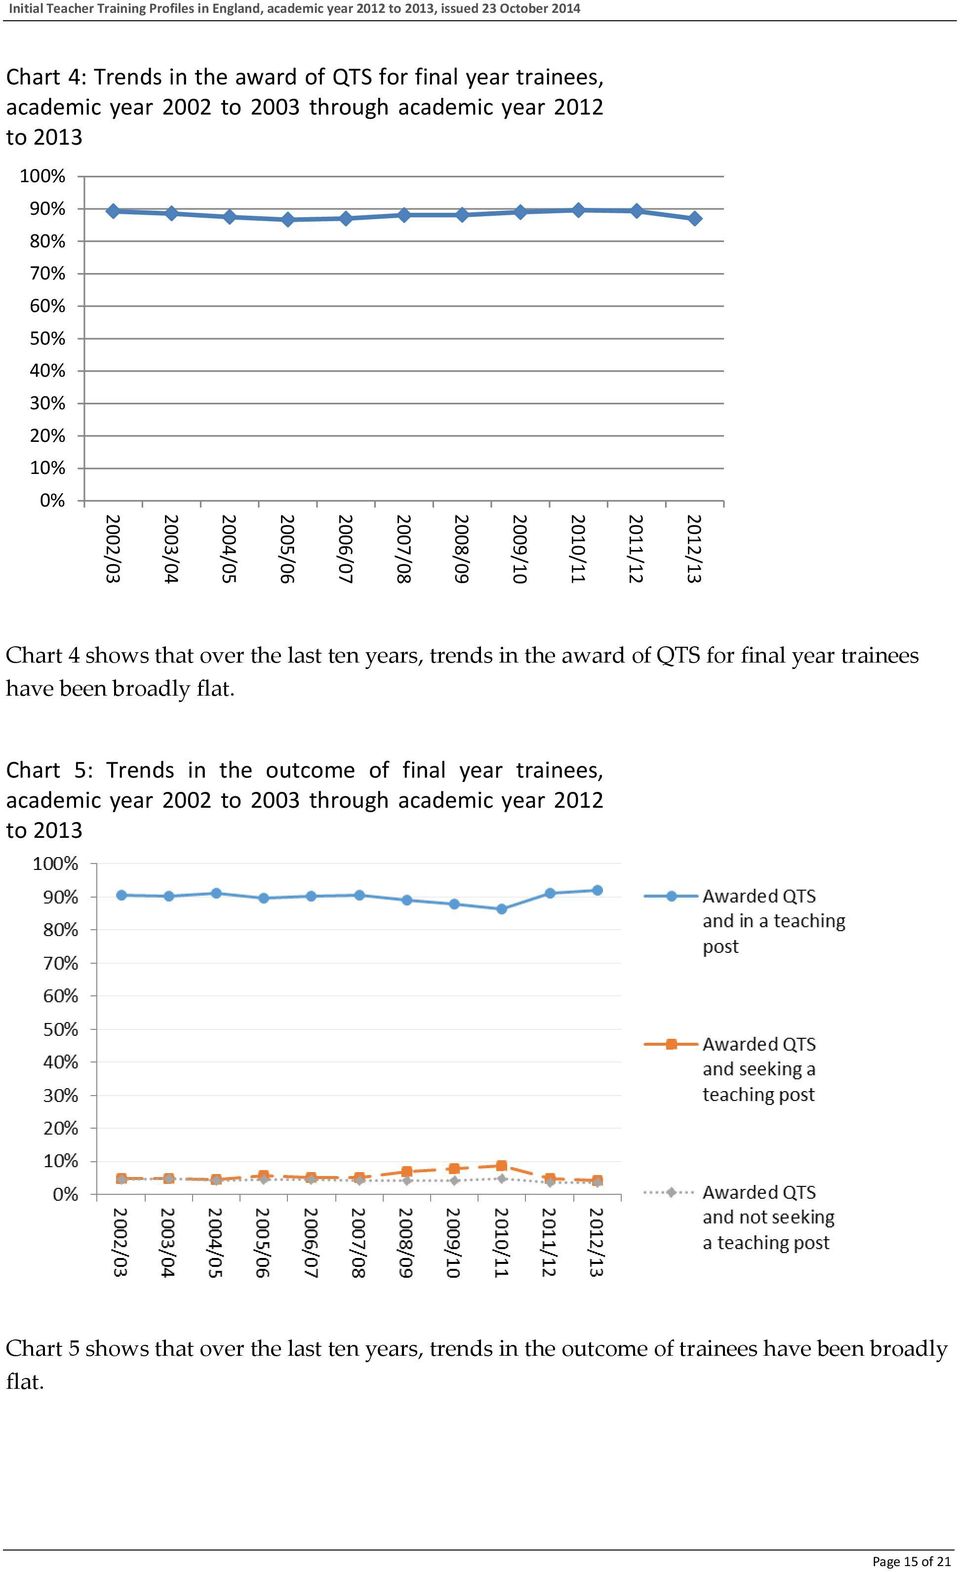 trends in the award of QTS for final year trainees have been broadly flat.